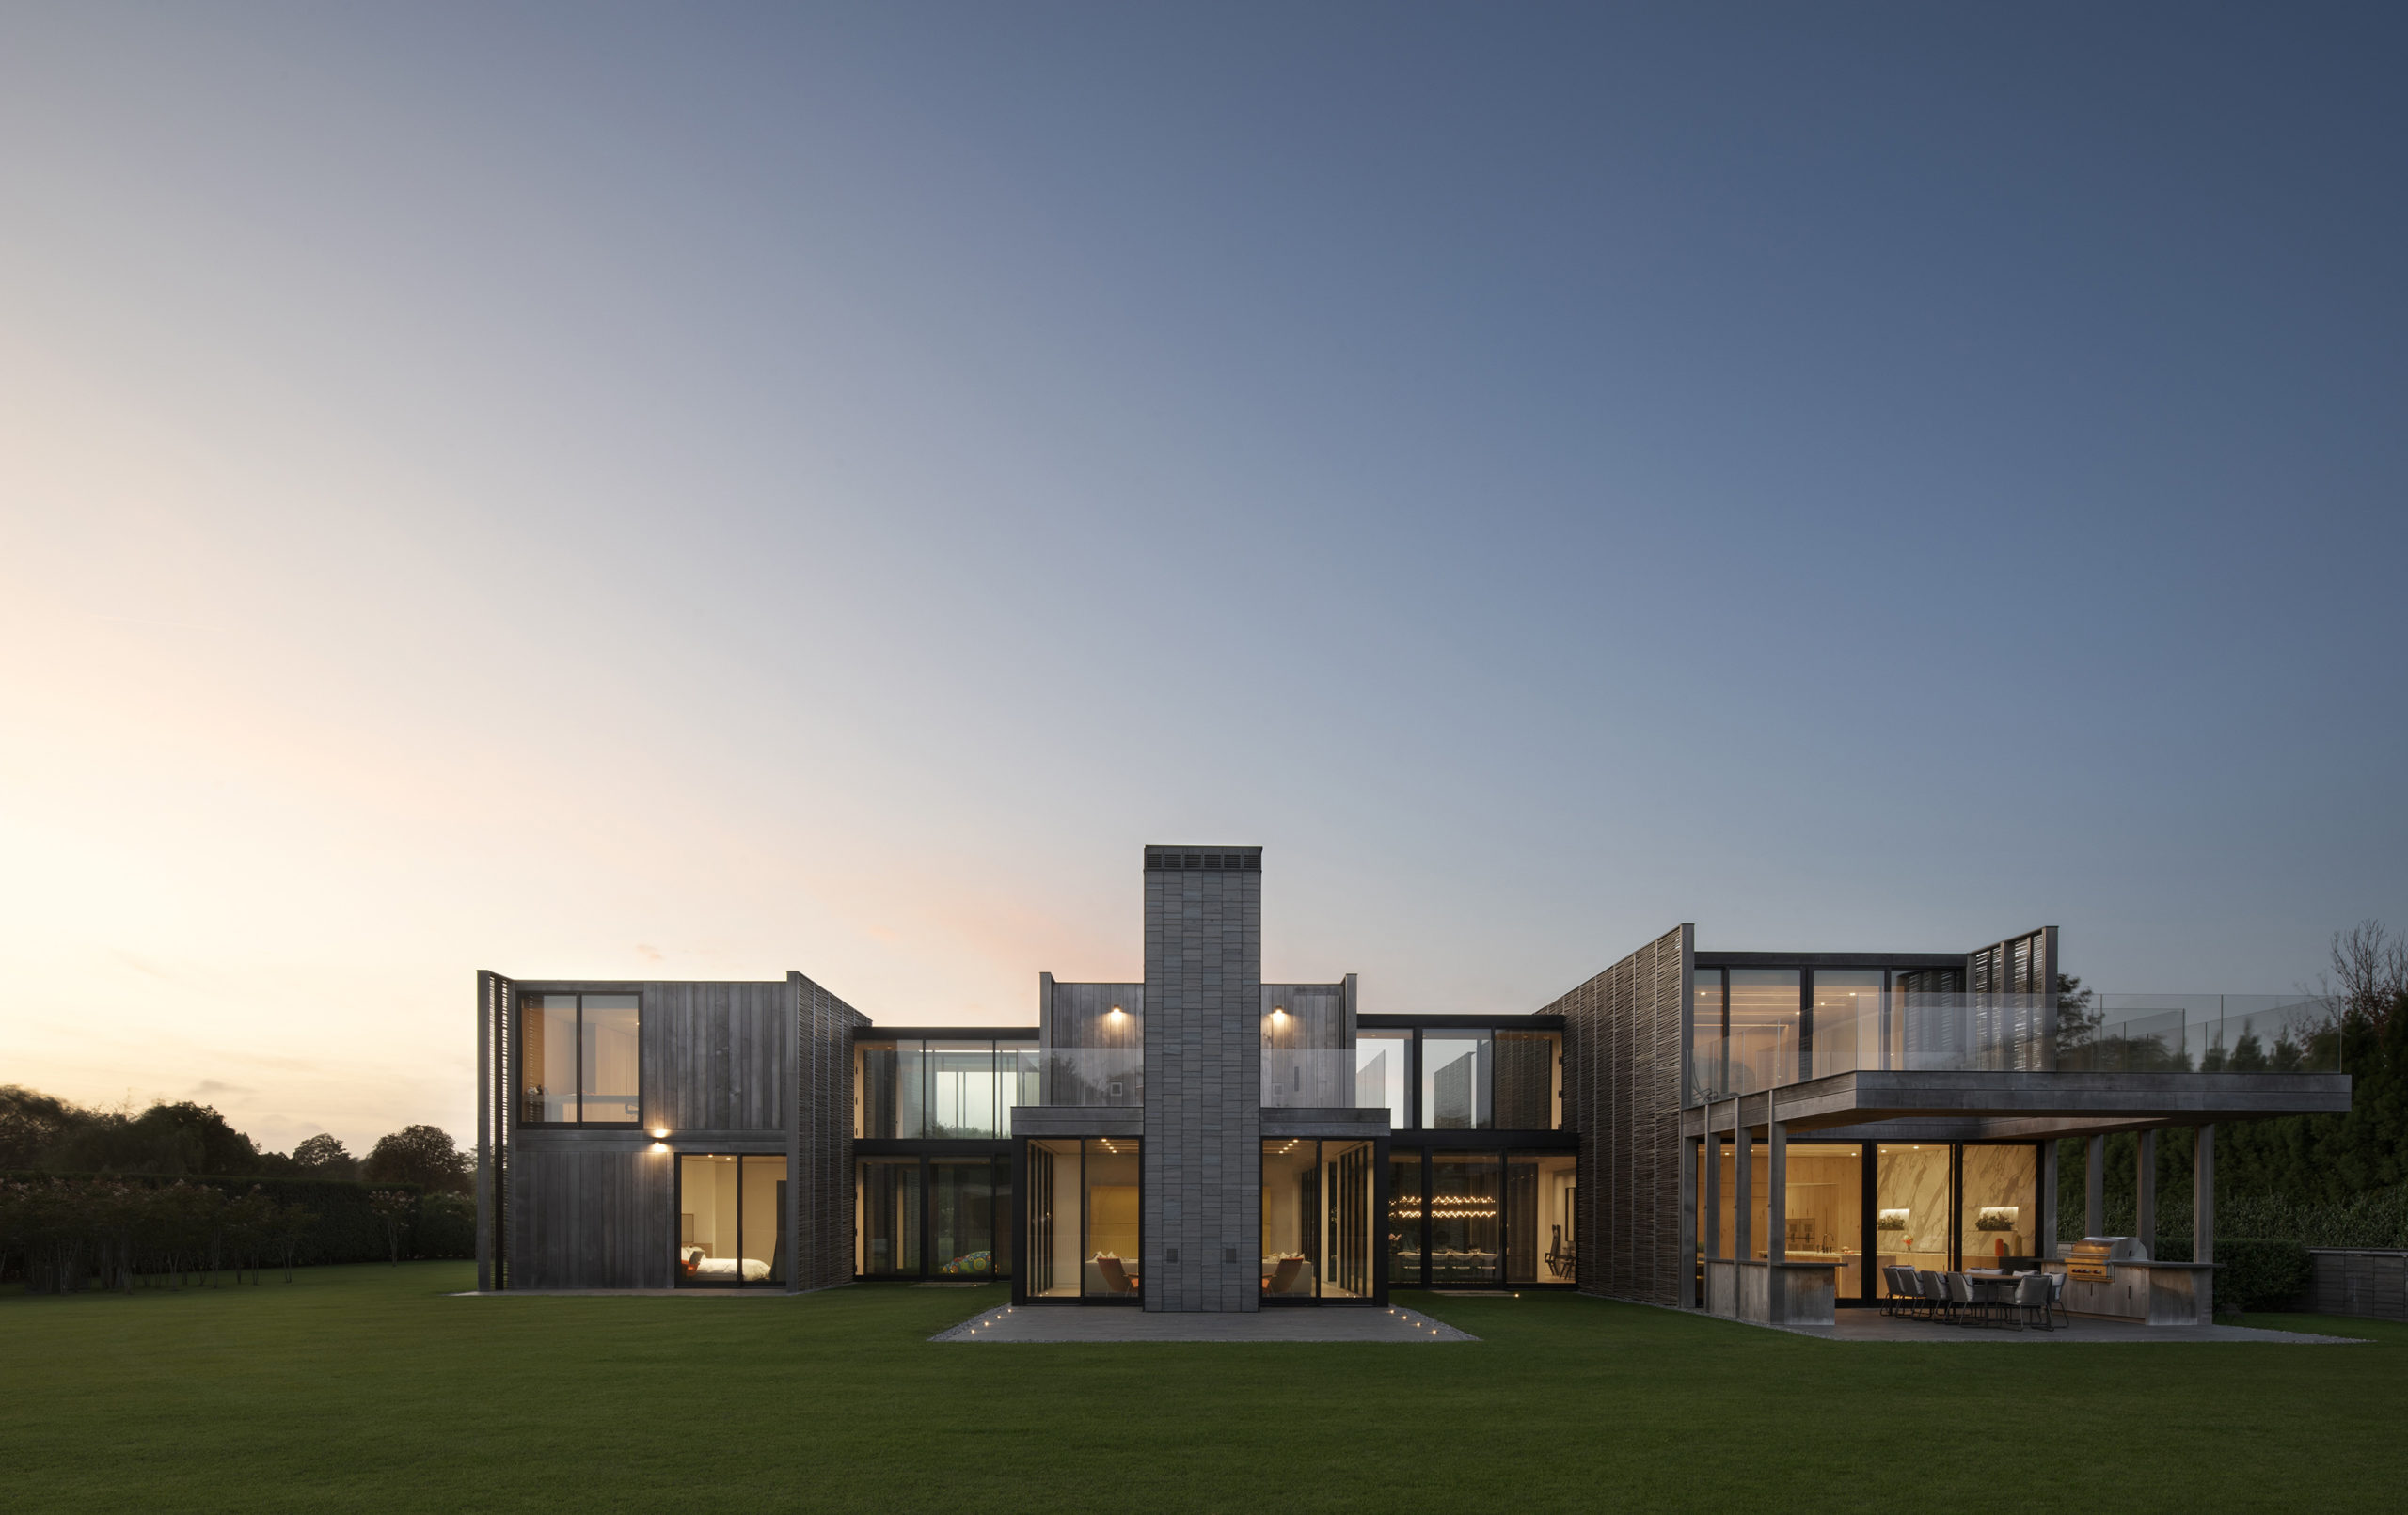 Sagg Farm in Sagaponack by Bates Masi + Architects won an Honor Award for architecture.